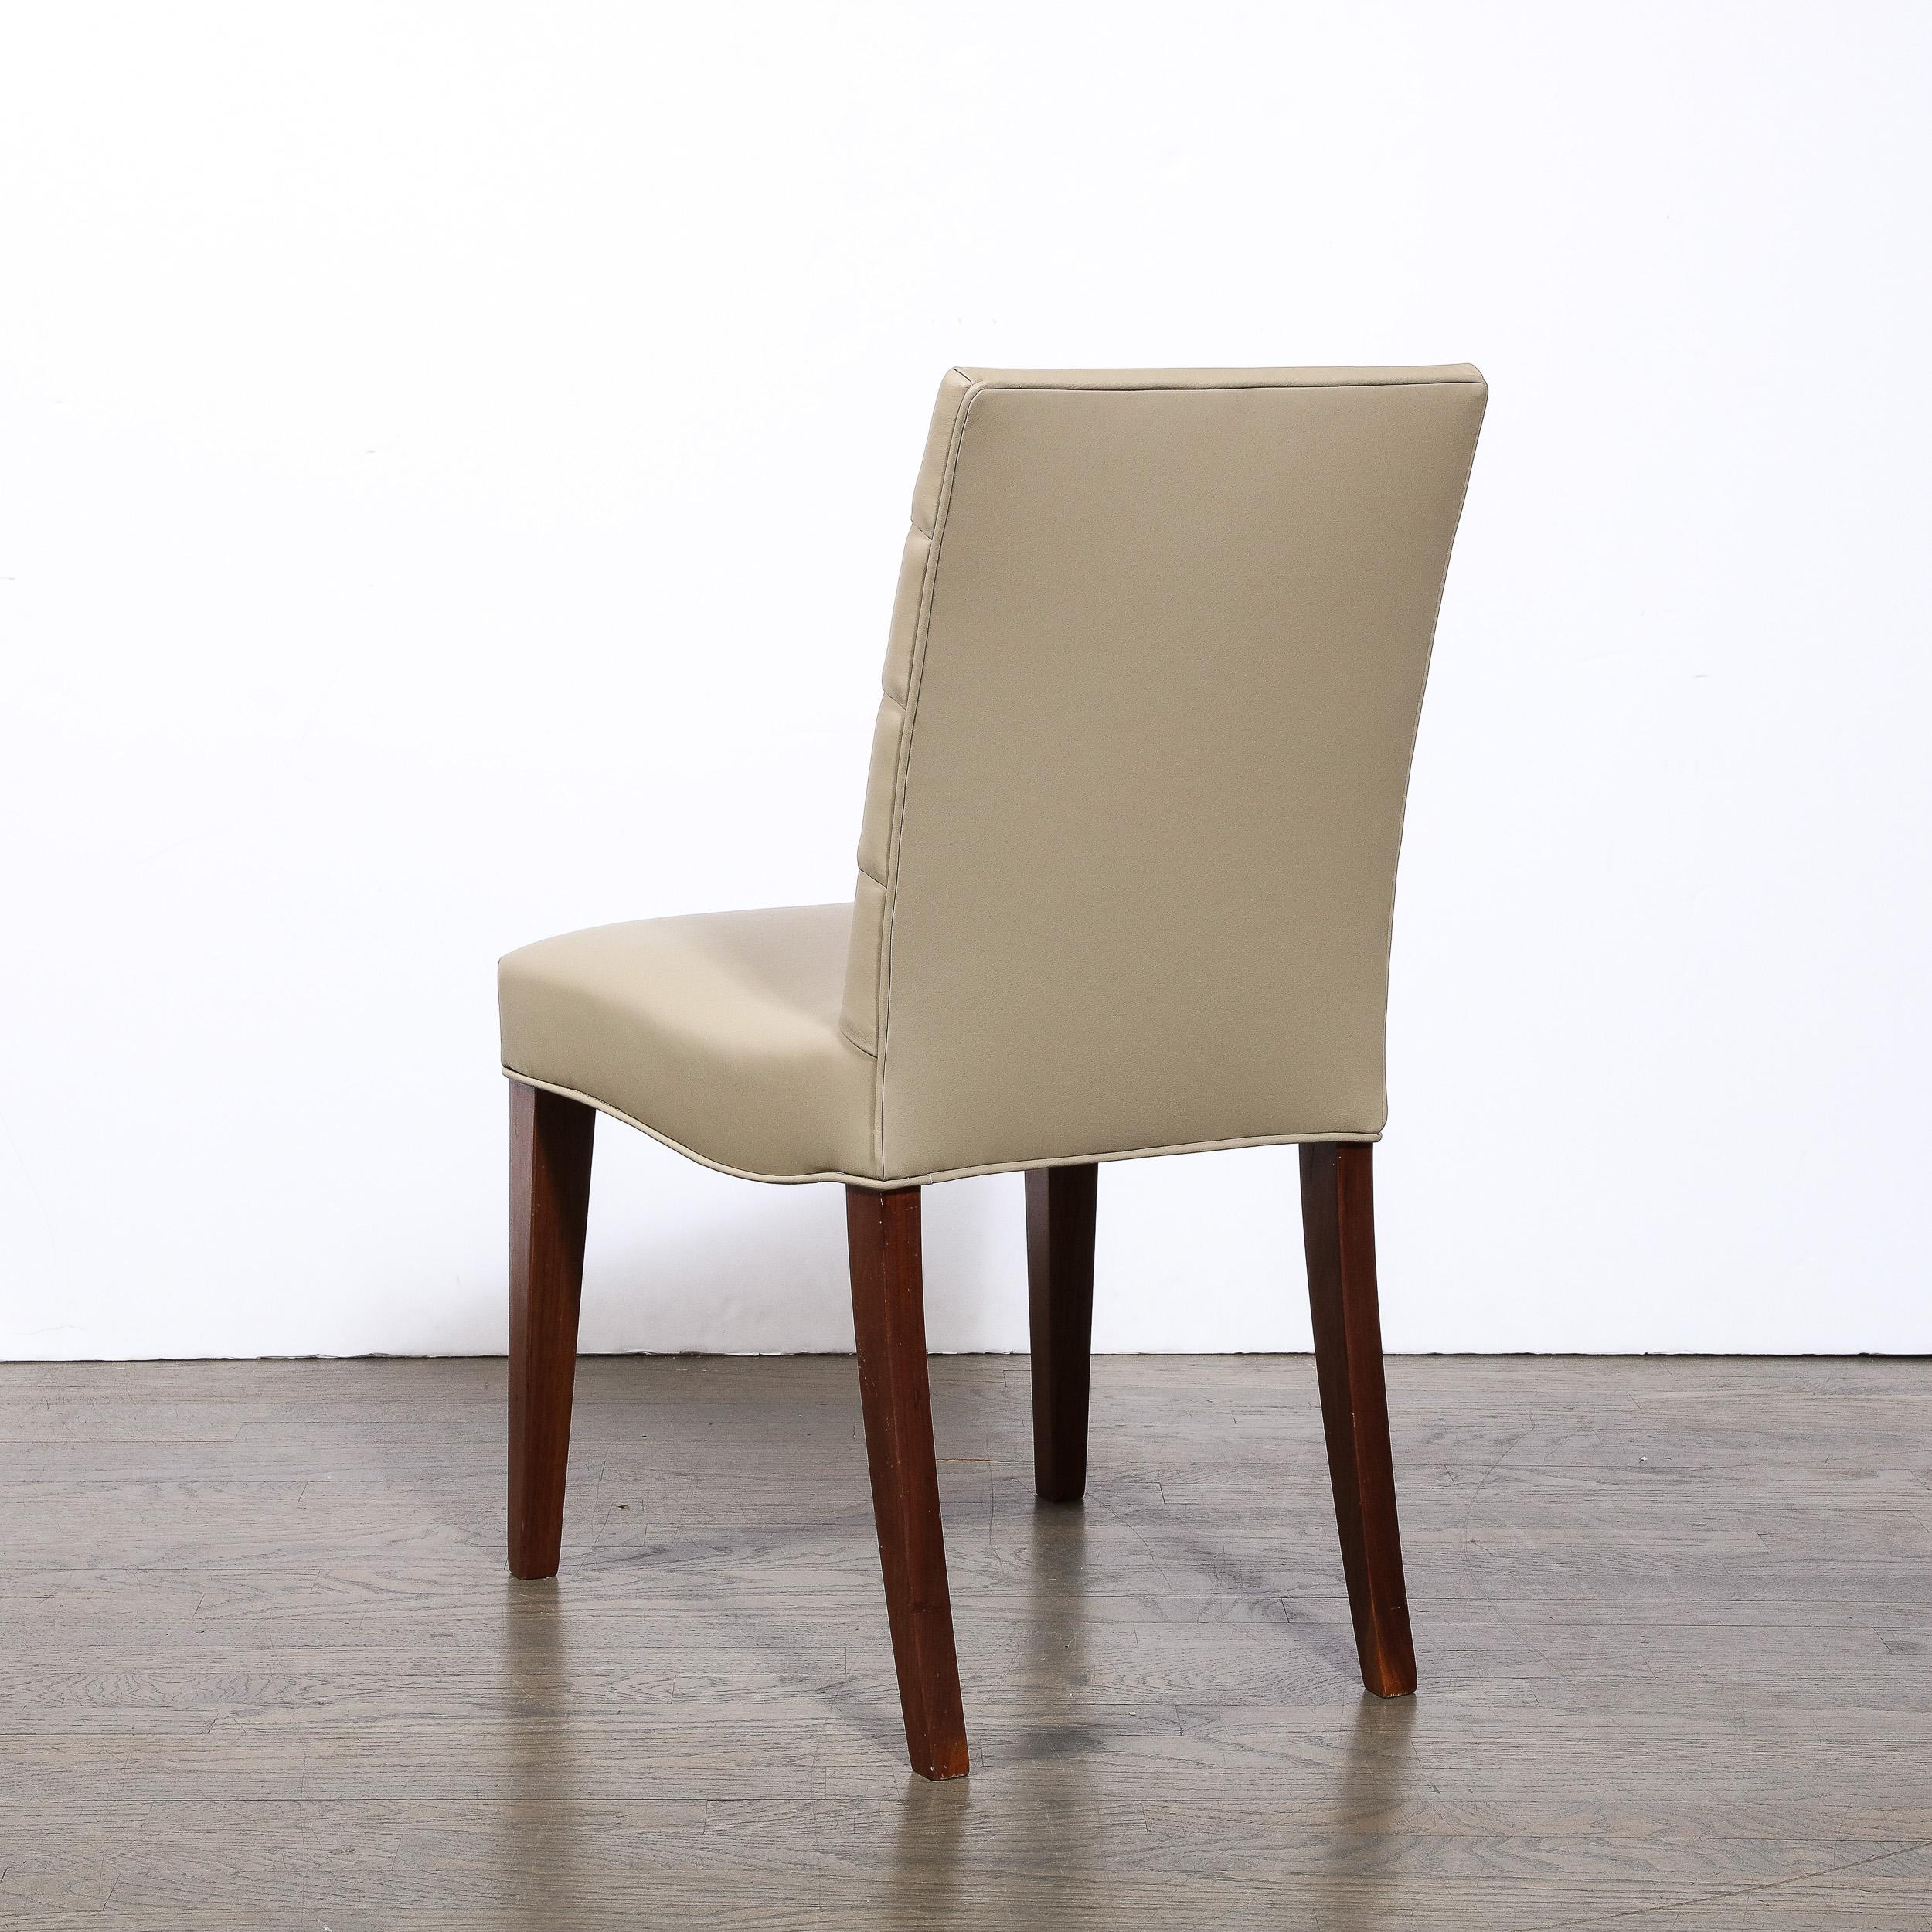 Art Deco Gilbert Rohde Chair in Holly Hunt Leather w/ Tufted Back & Walnut Legs For Sale 2